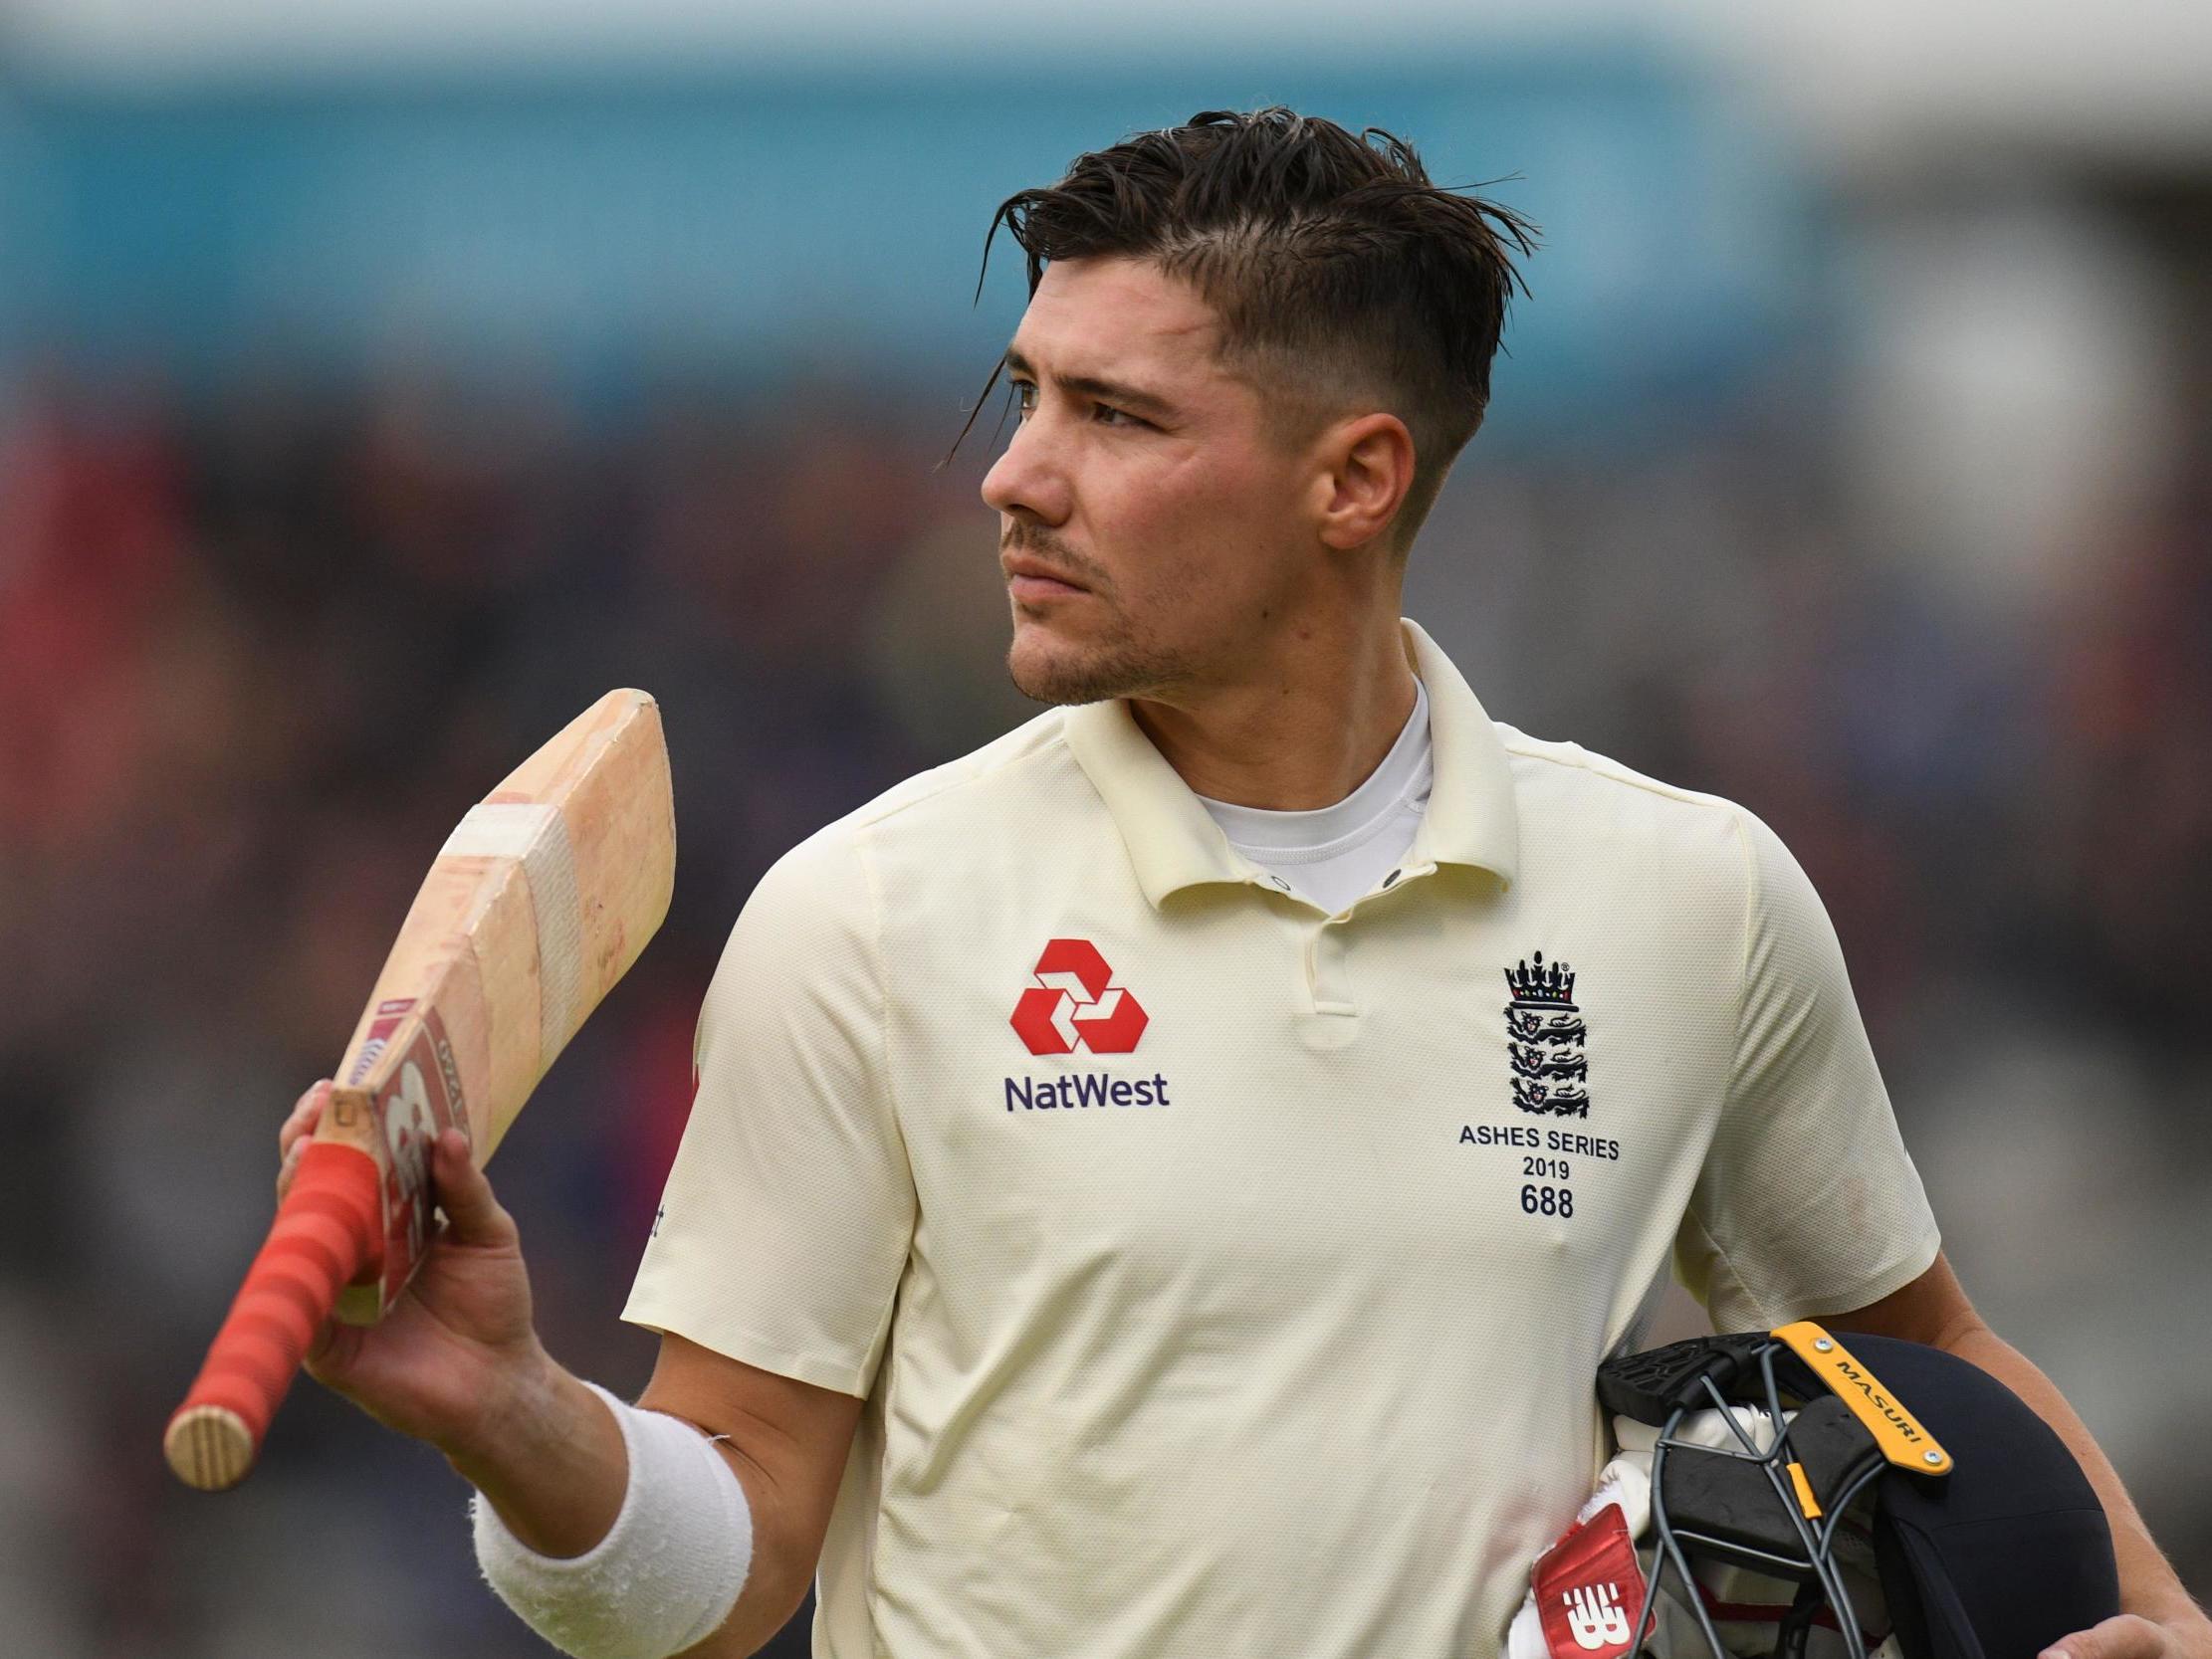 Ashes 2019: Rory Burns lifts England spirits before Australia reassert their dominance in fourth Test